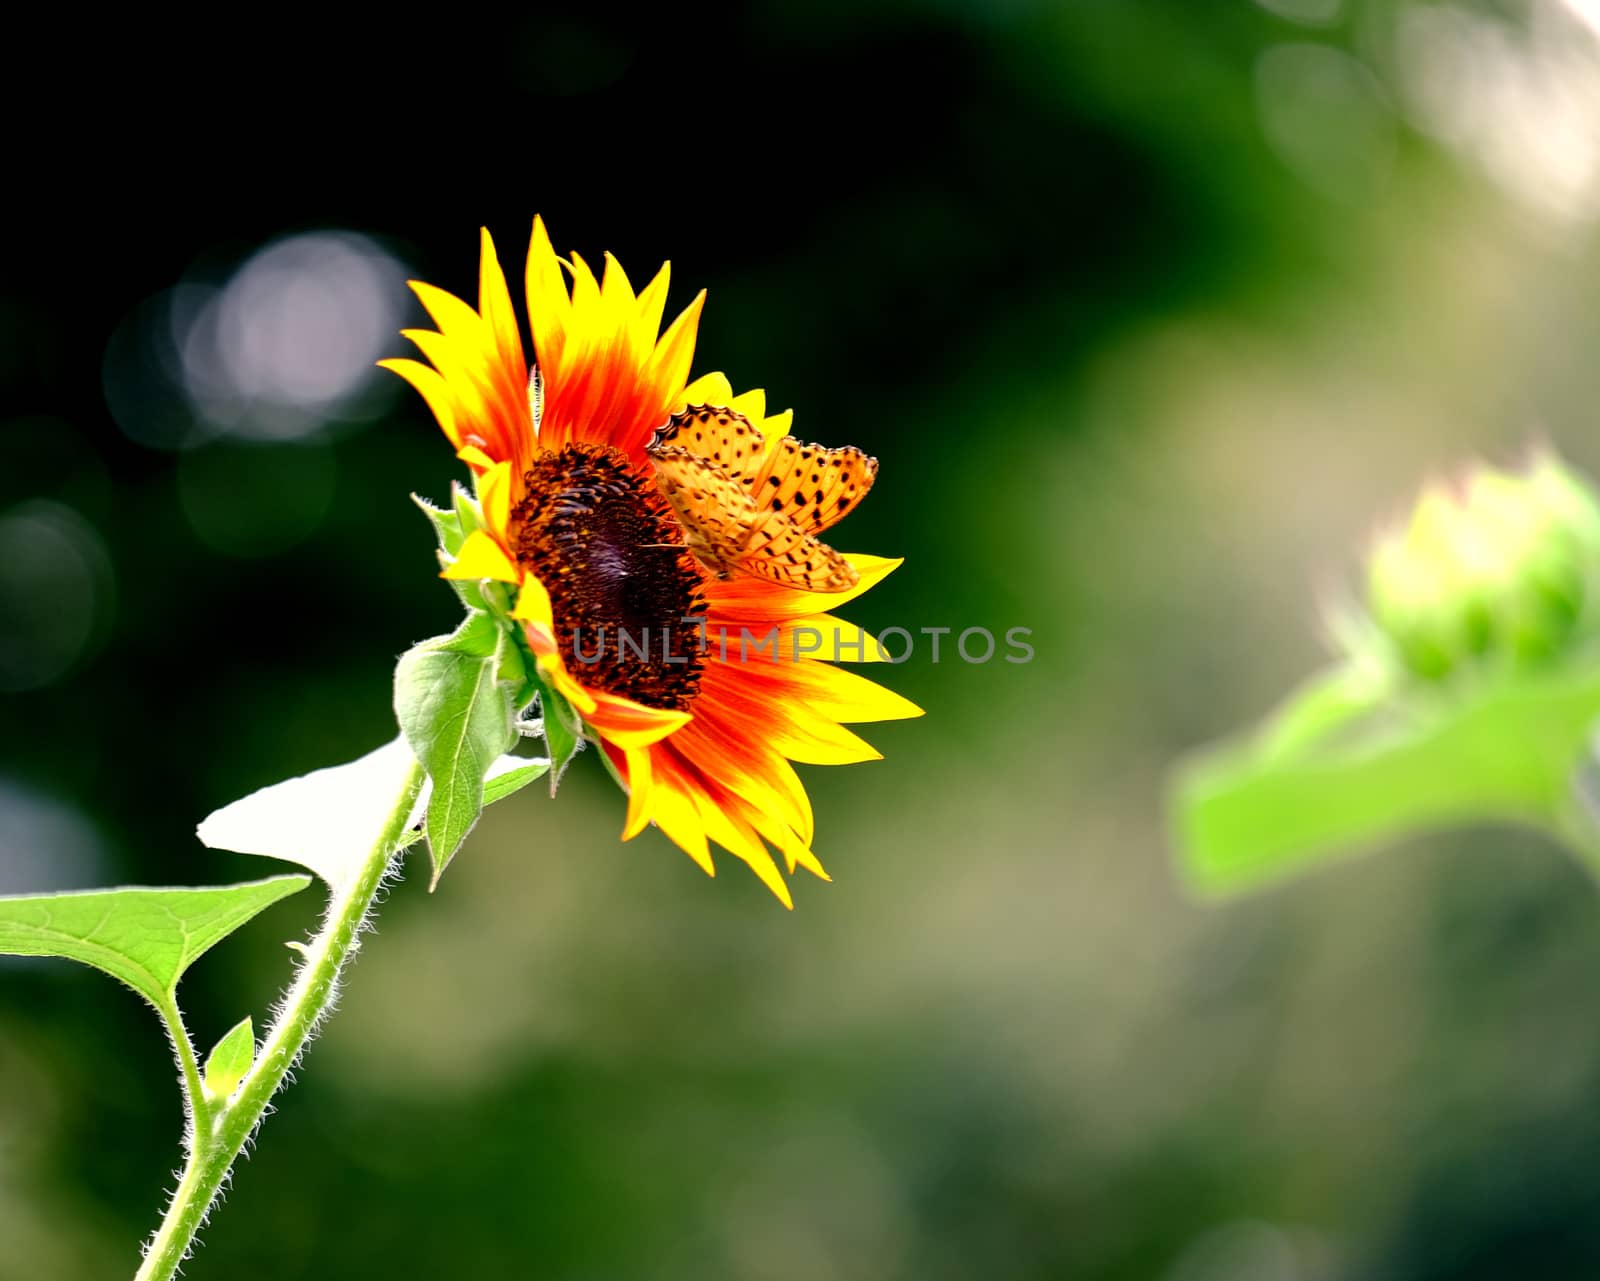 butterfly on sunflower in sunny day